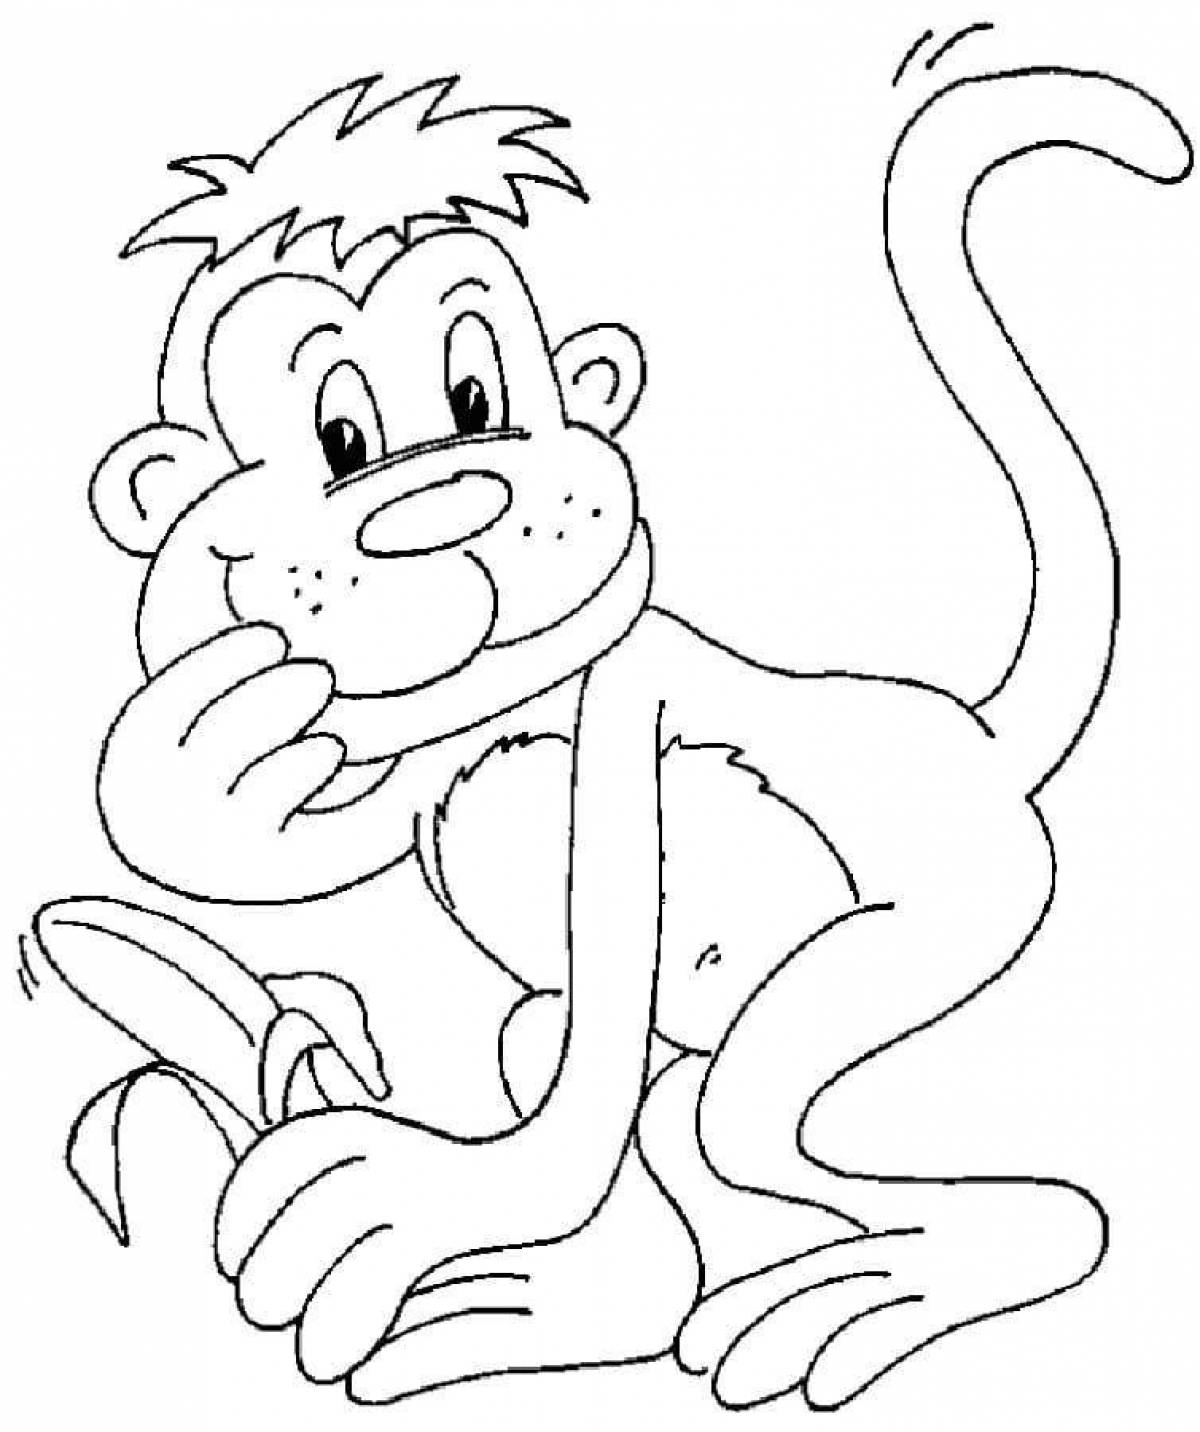 Delightful monkey coloring book for kids